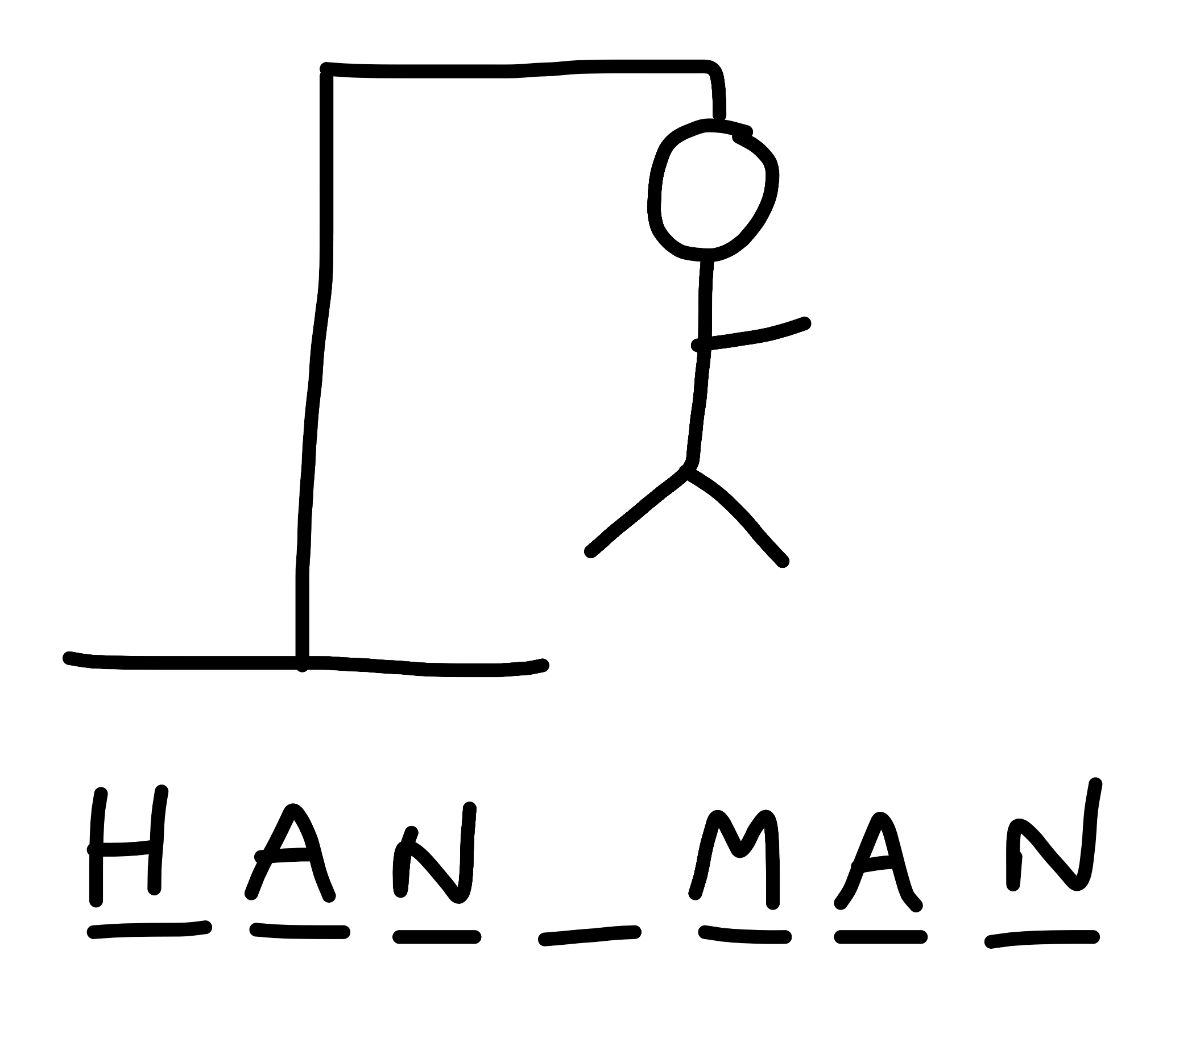 a drawing of a hangman game. The word Hangman is spelt out below with the G missing